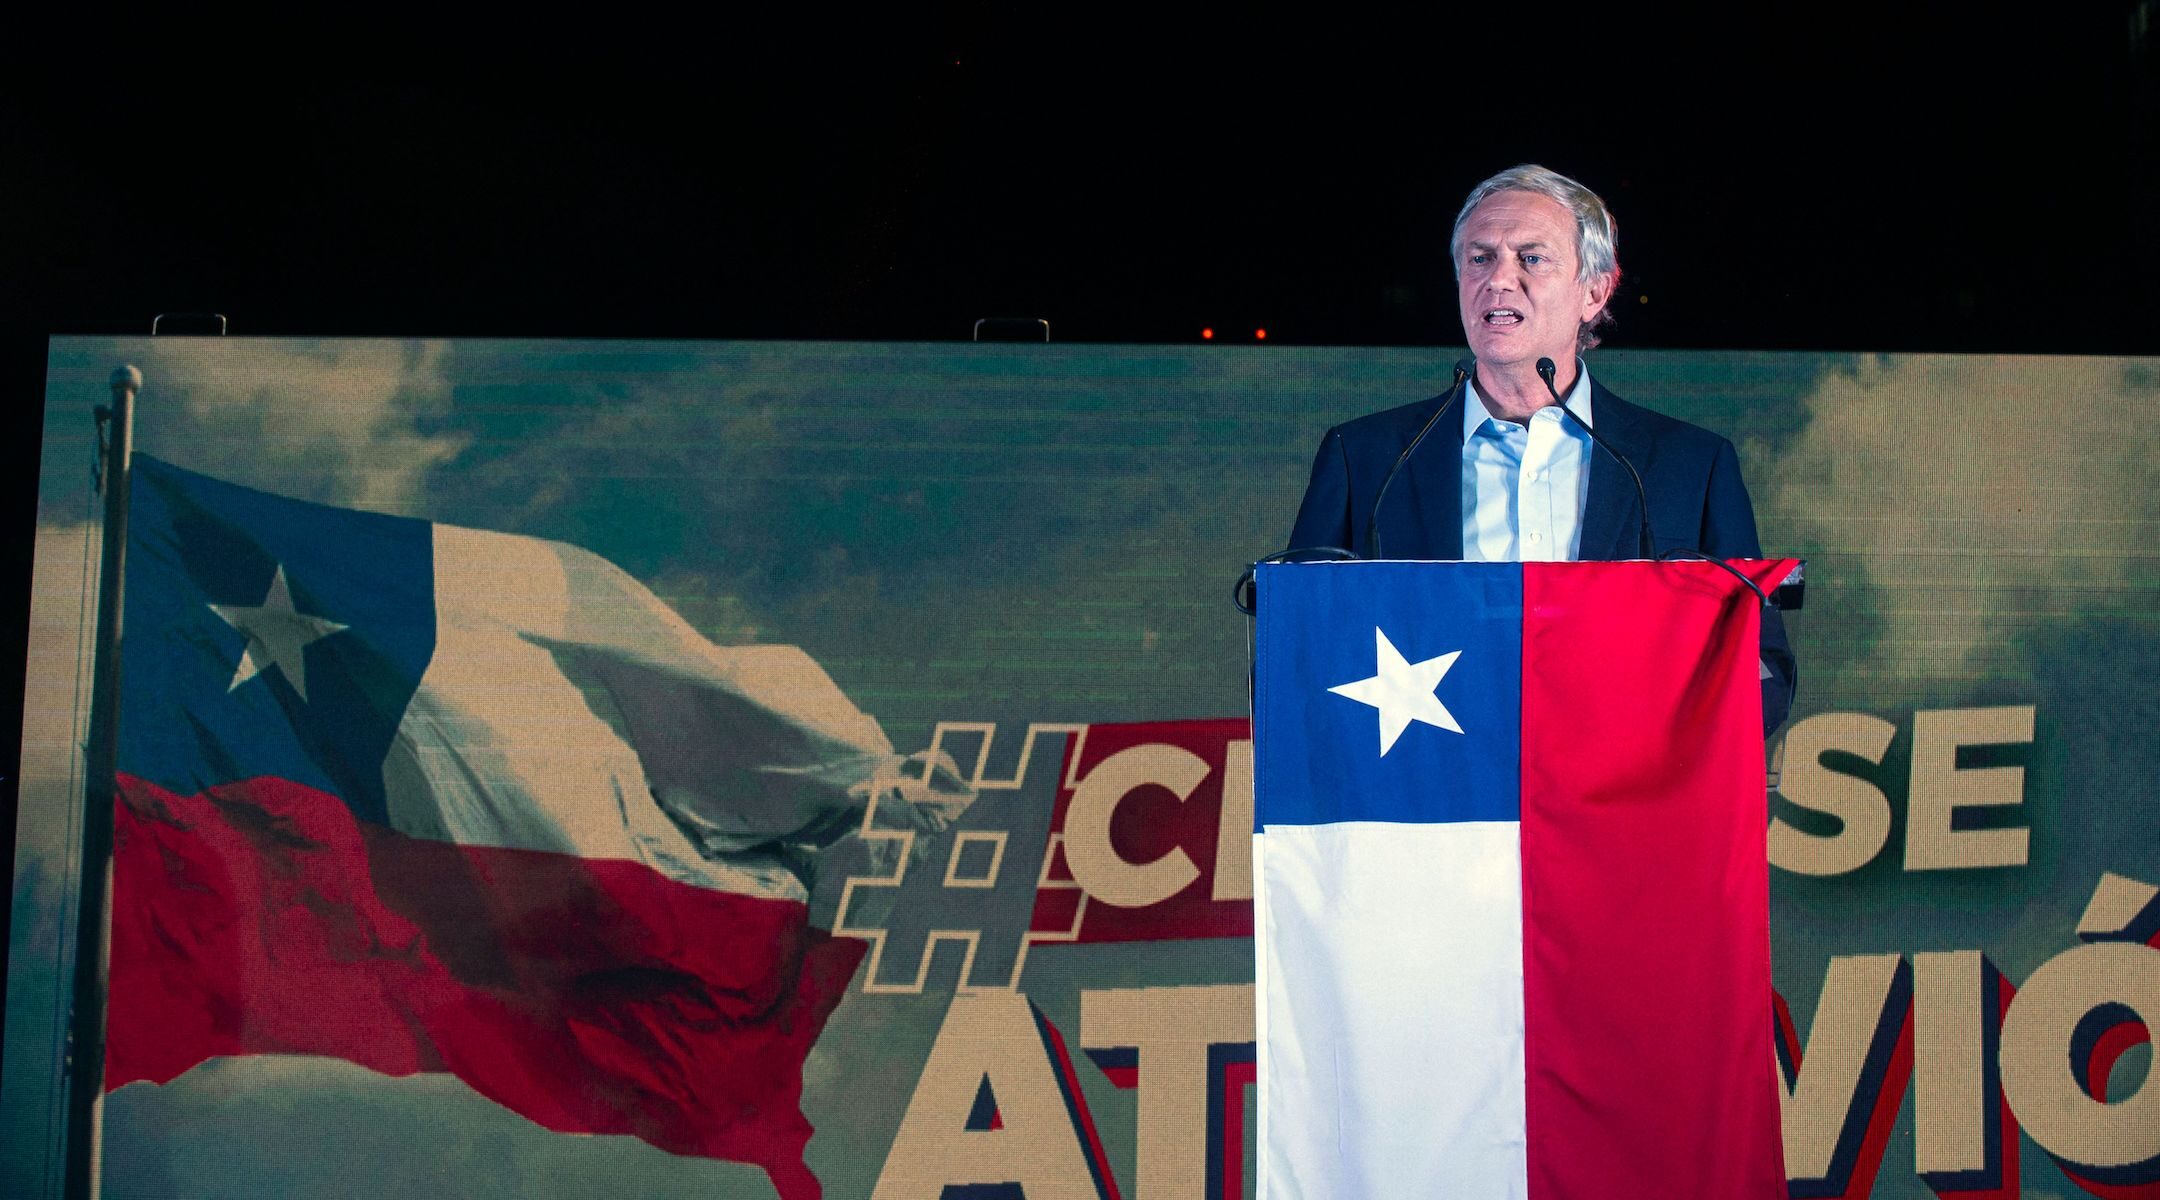 Chilean presidential candidate José Antonio Kast addresses supporters